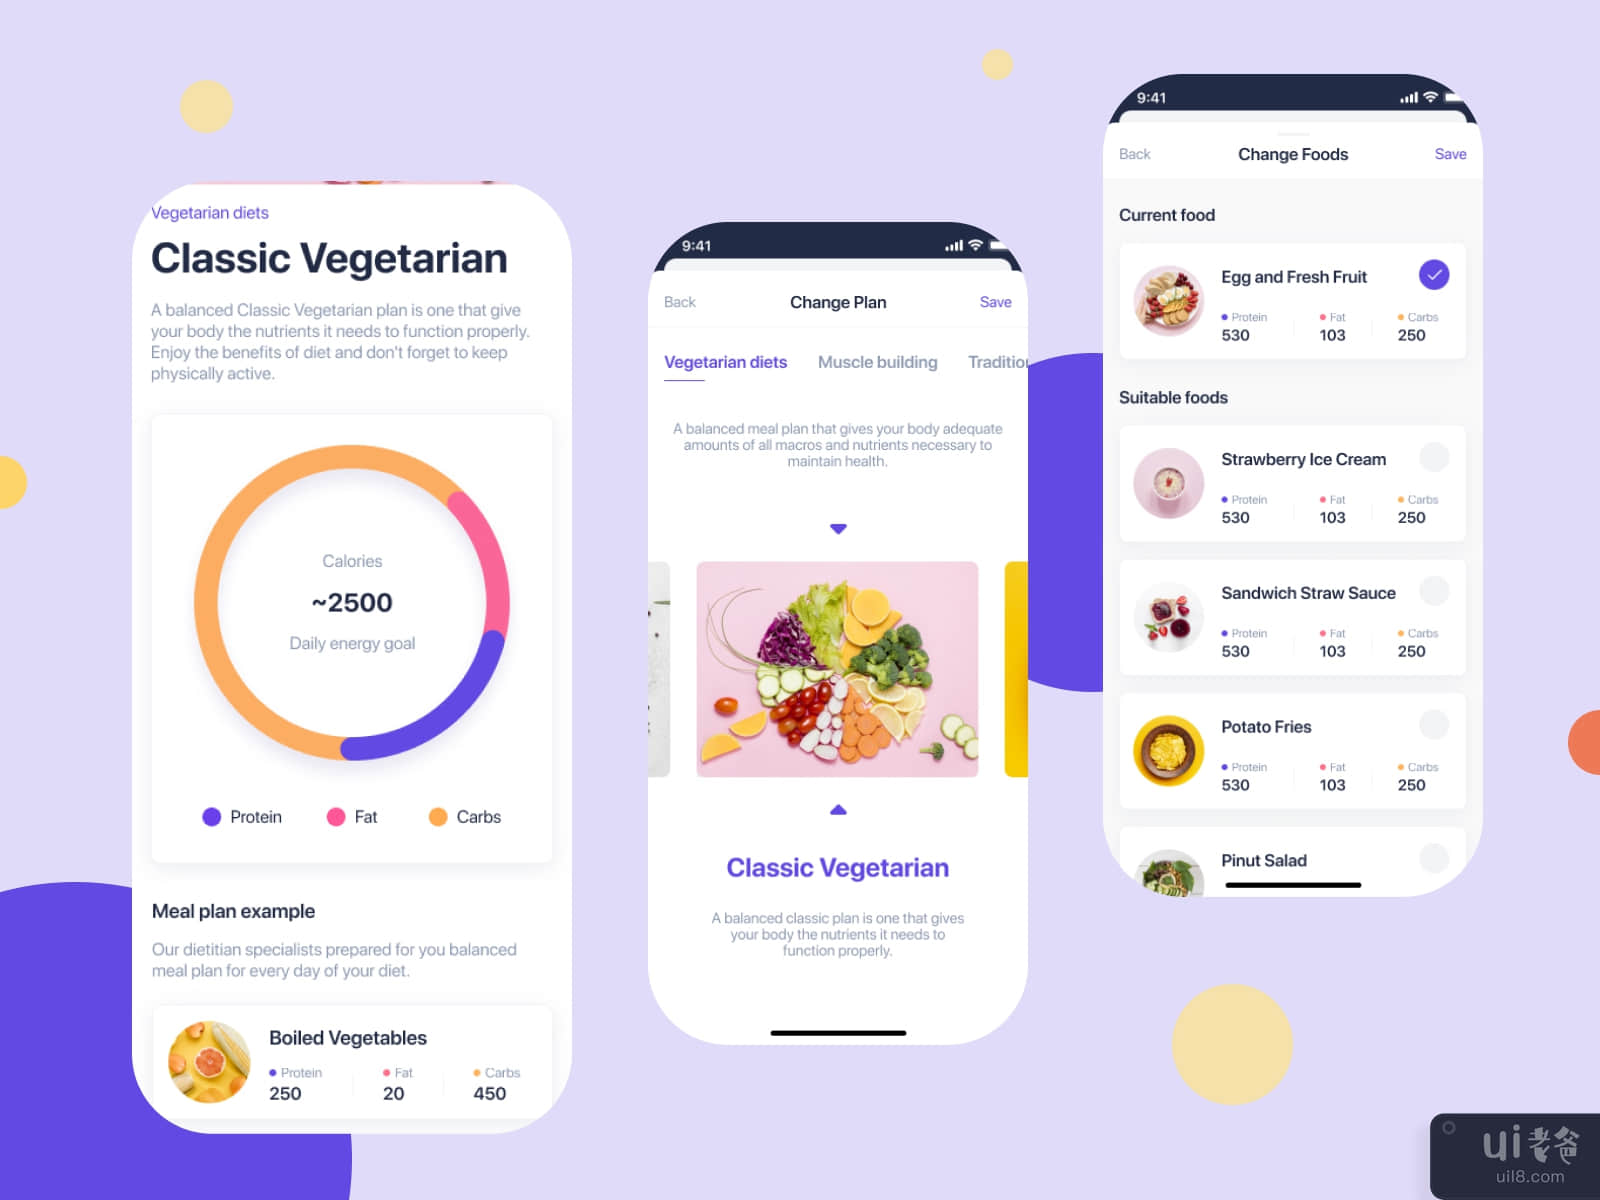 Sportbox - Workouts & Meal Planner UI Kit #3